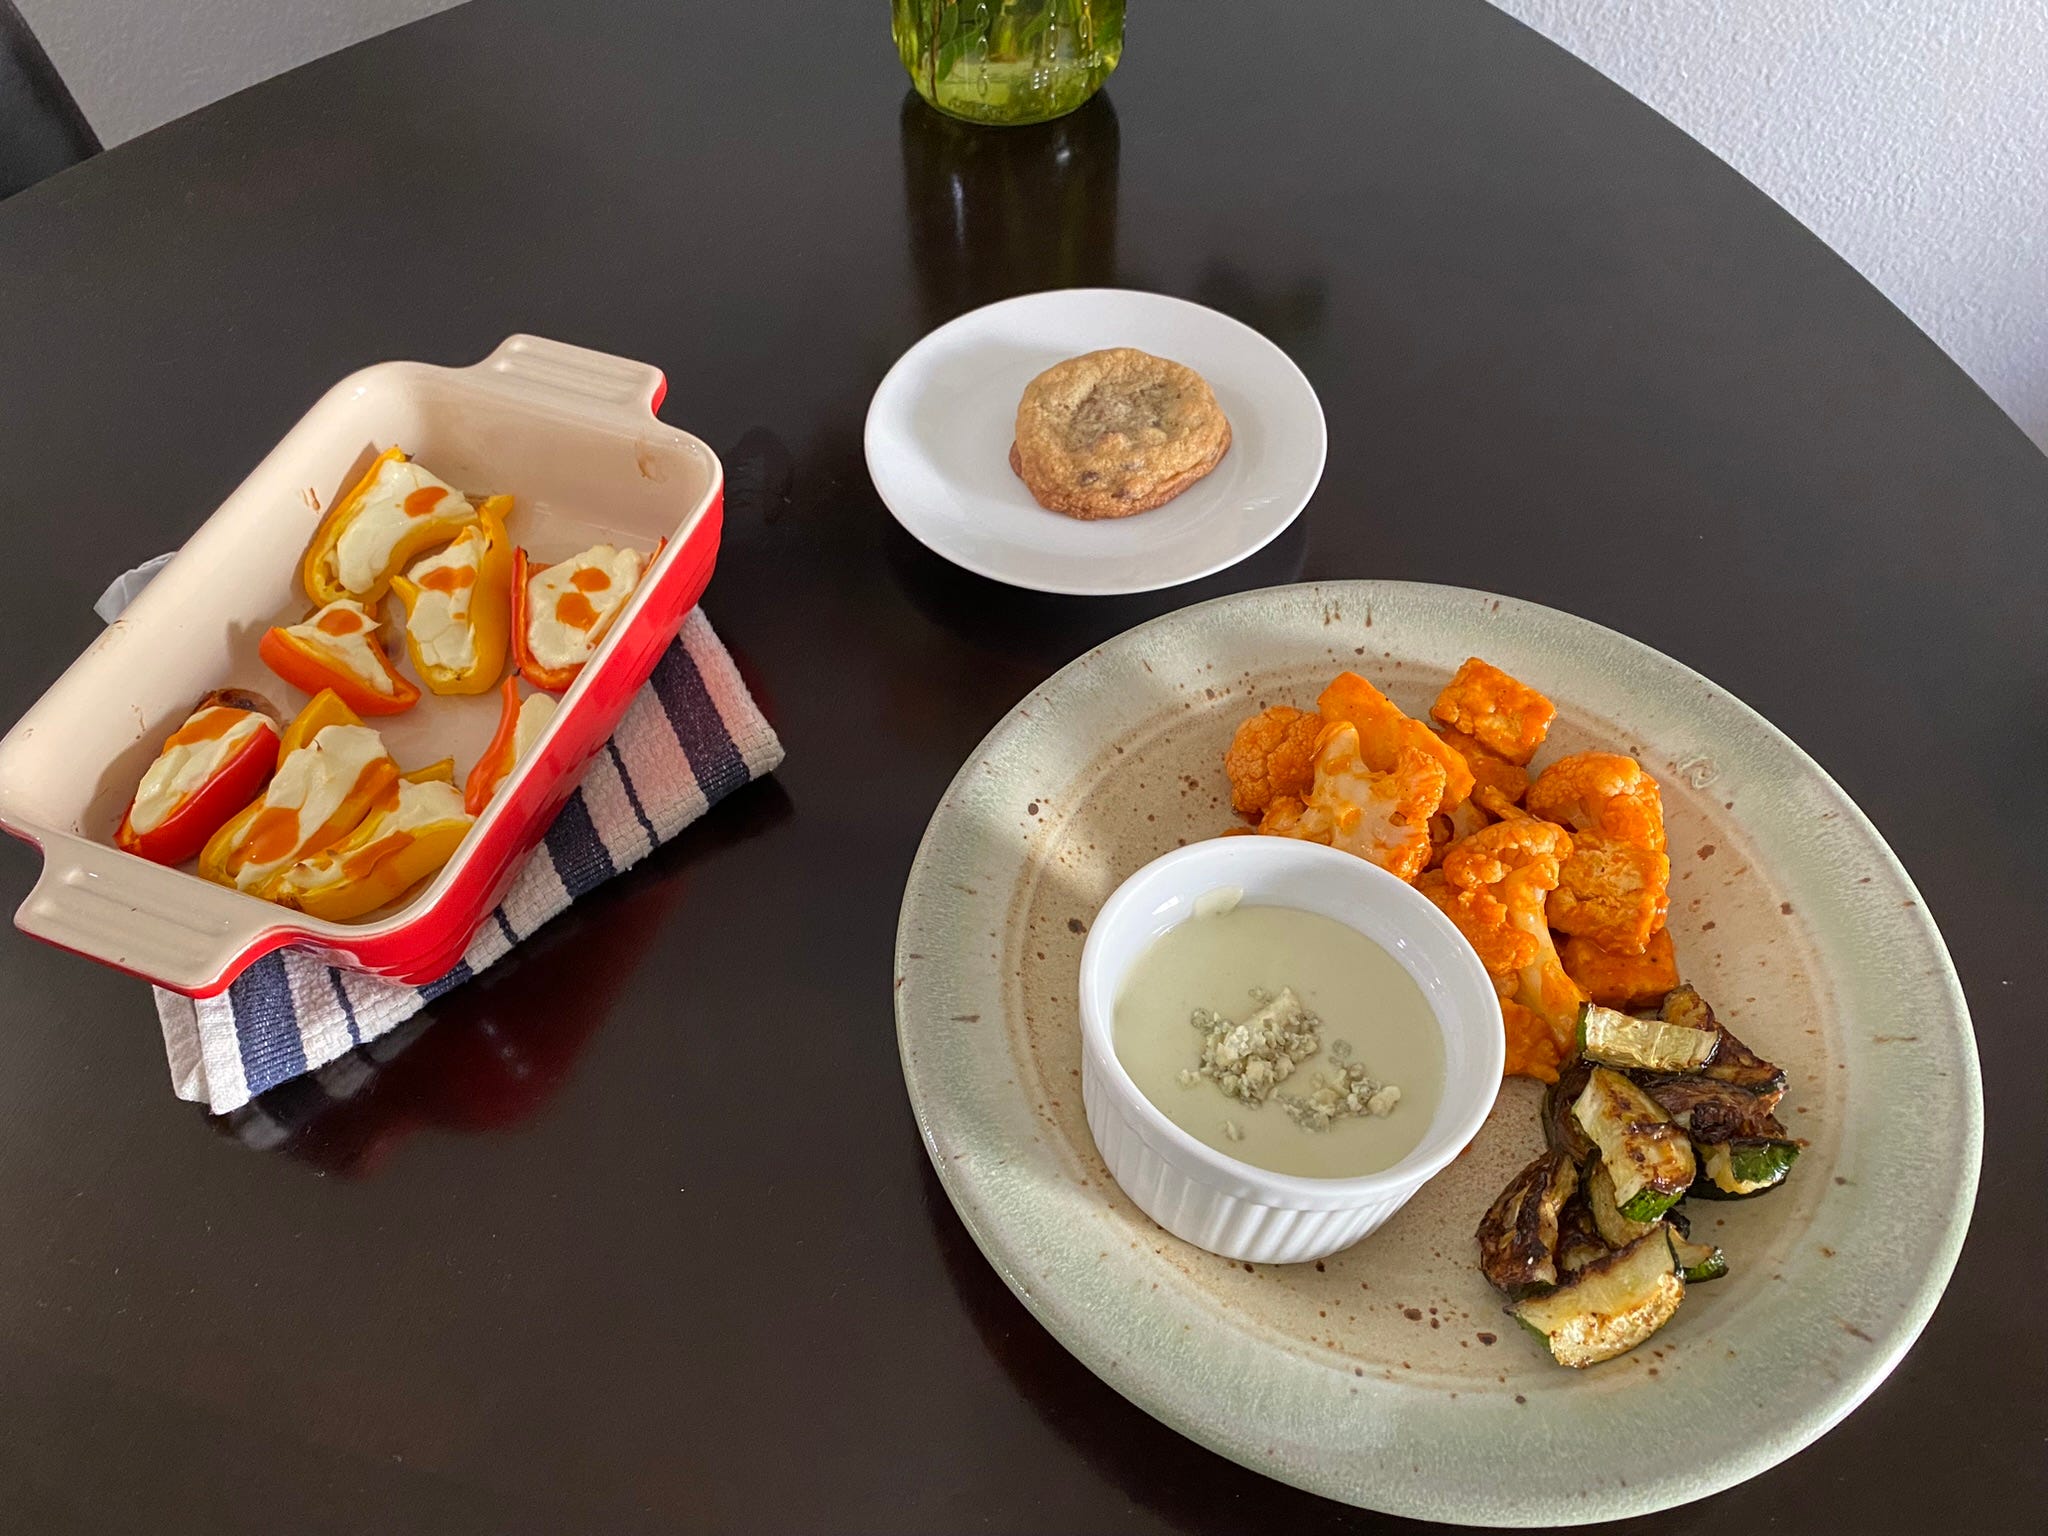 <p>On day seven, I had plans with a friend so my final three-course meal was a little early.</p><p>I went with a game-day theme of cream-cheese-stuffed bell peppers, Buffalo cauliflower and tofu with a side of blue-cheese dipping sauce and zucchini, and my <a href="https://www.insider.com/which-famous-chef-has-the-best-chocolate-chip-cookie-recipe">favorite chocolate-chip cookies</a> for dessert.</p><p>I winged the cream-cheese-stuffed peppers but realized I should've followed a recipe, as they turned out quite bland.</p><p>Thankfully, the entrée made up for the lackluster app.</p><p>Of course, the chocolate-chip cookies were also a hit, but this is a dessert I make often. I knew I could count on them for a good end to the week.</p>